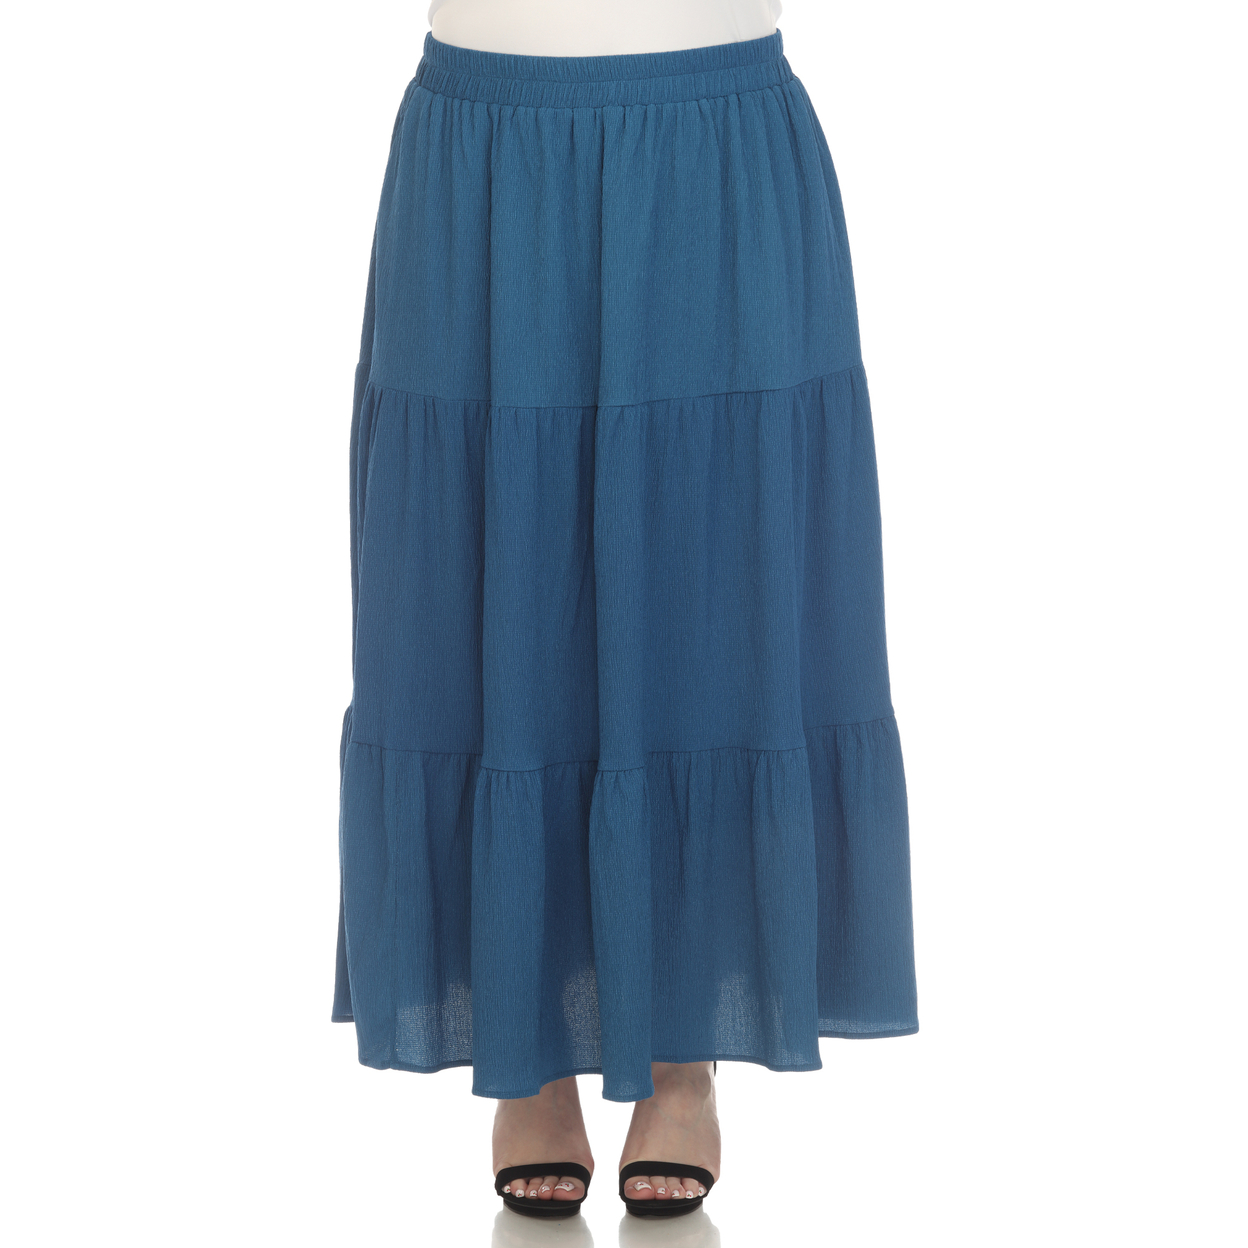 White Mark Women's Pleated Tiered Maxi Skirt - Royal, 2x